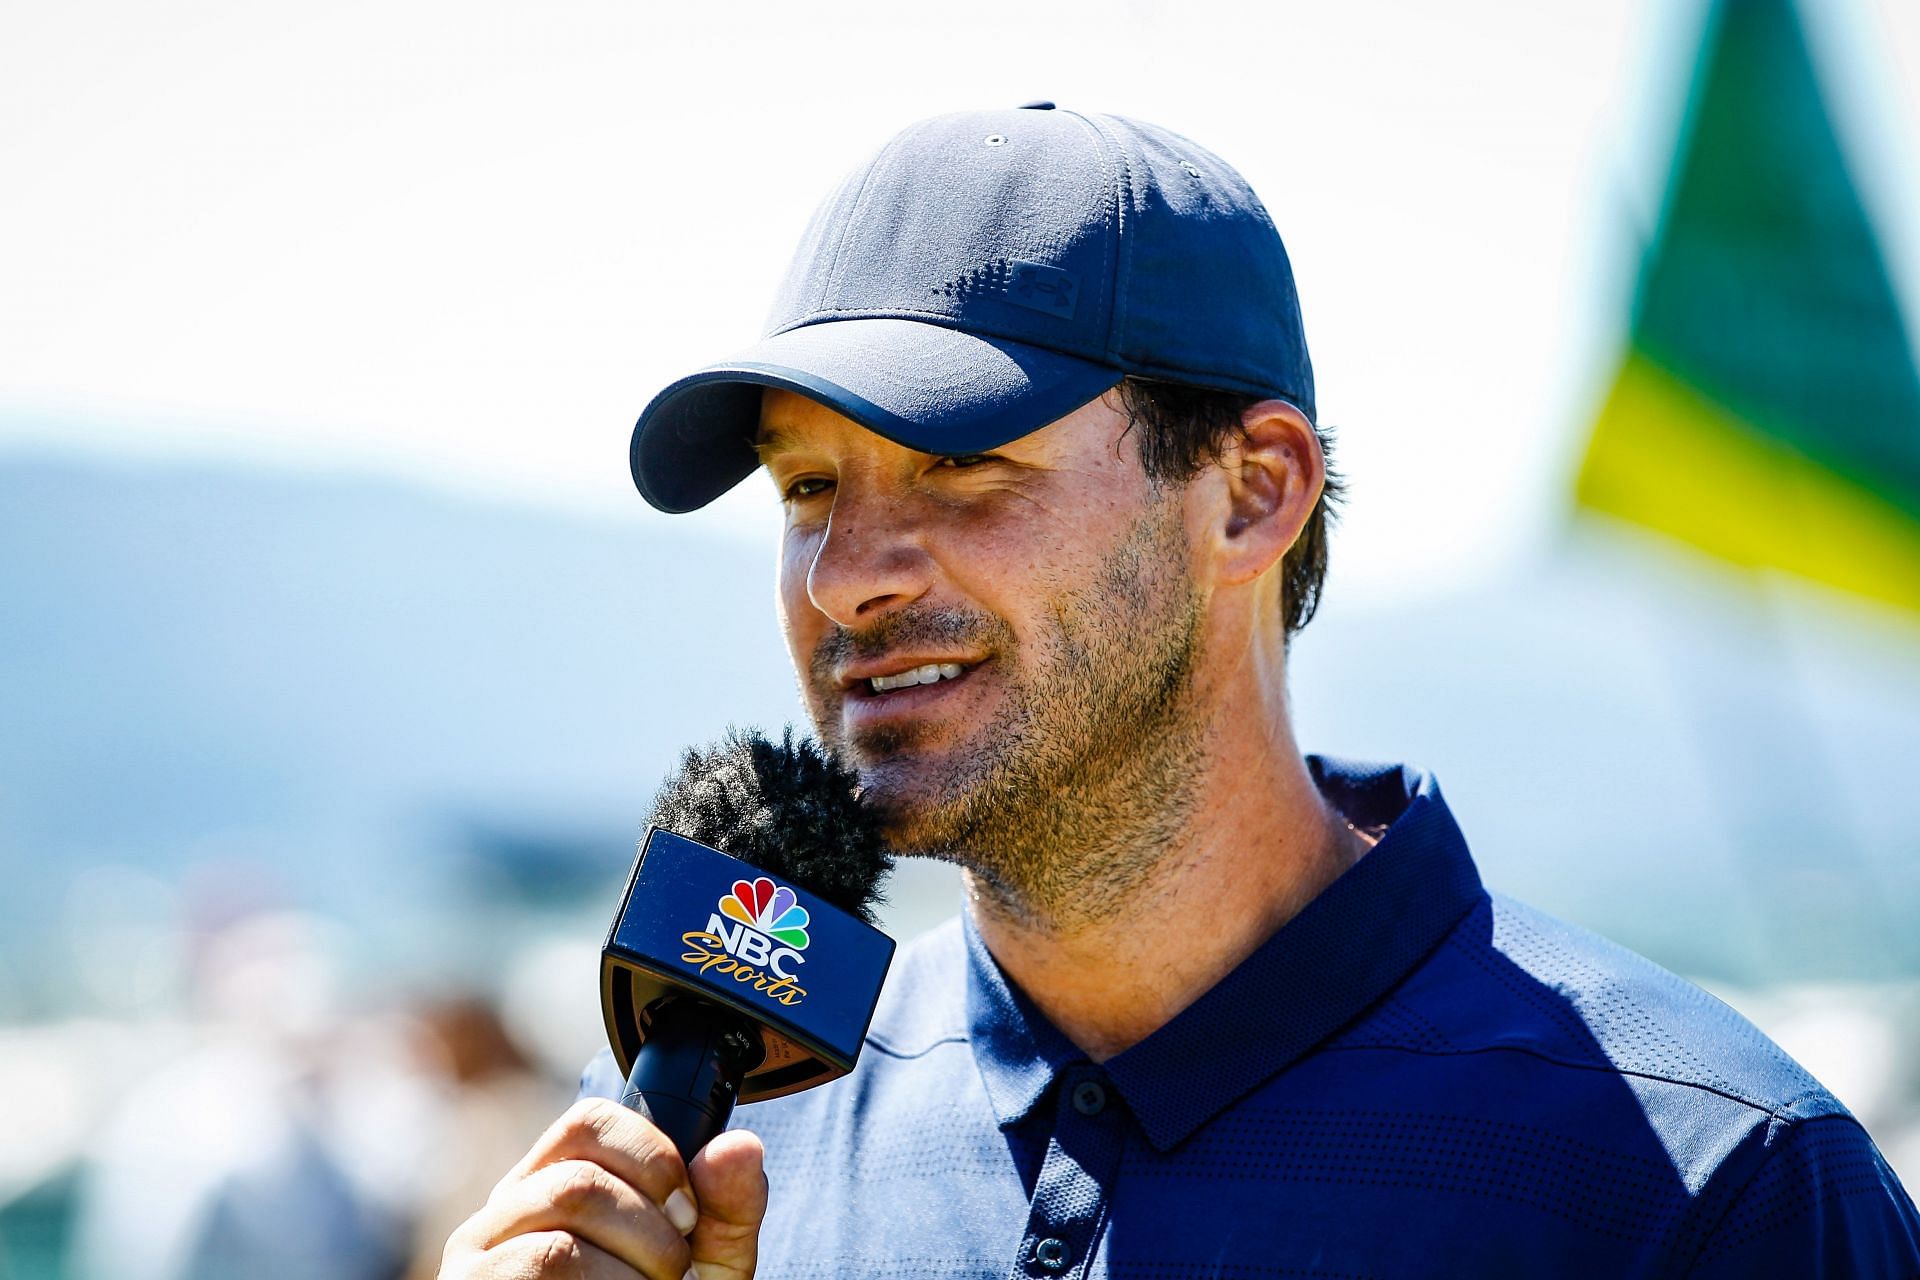 Tony Romo is in hot water over comments made on Sunday